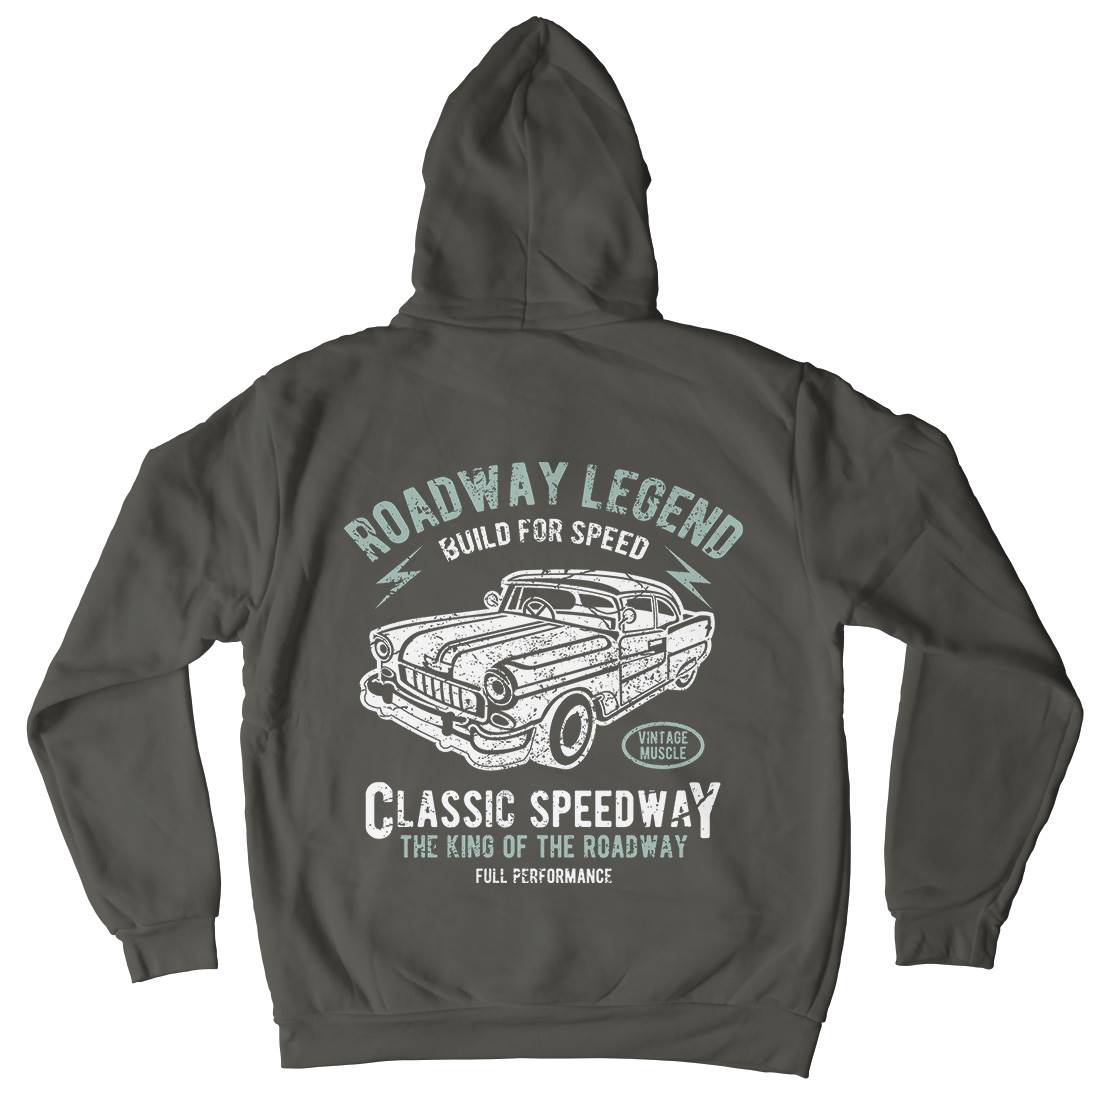 Roadway Legend Mens Hoodie With Pocket Cars A124